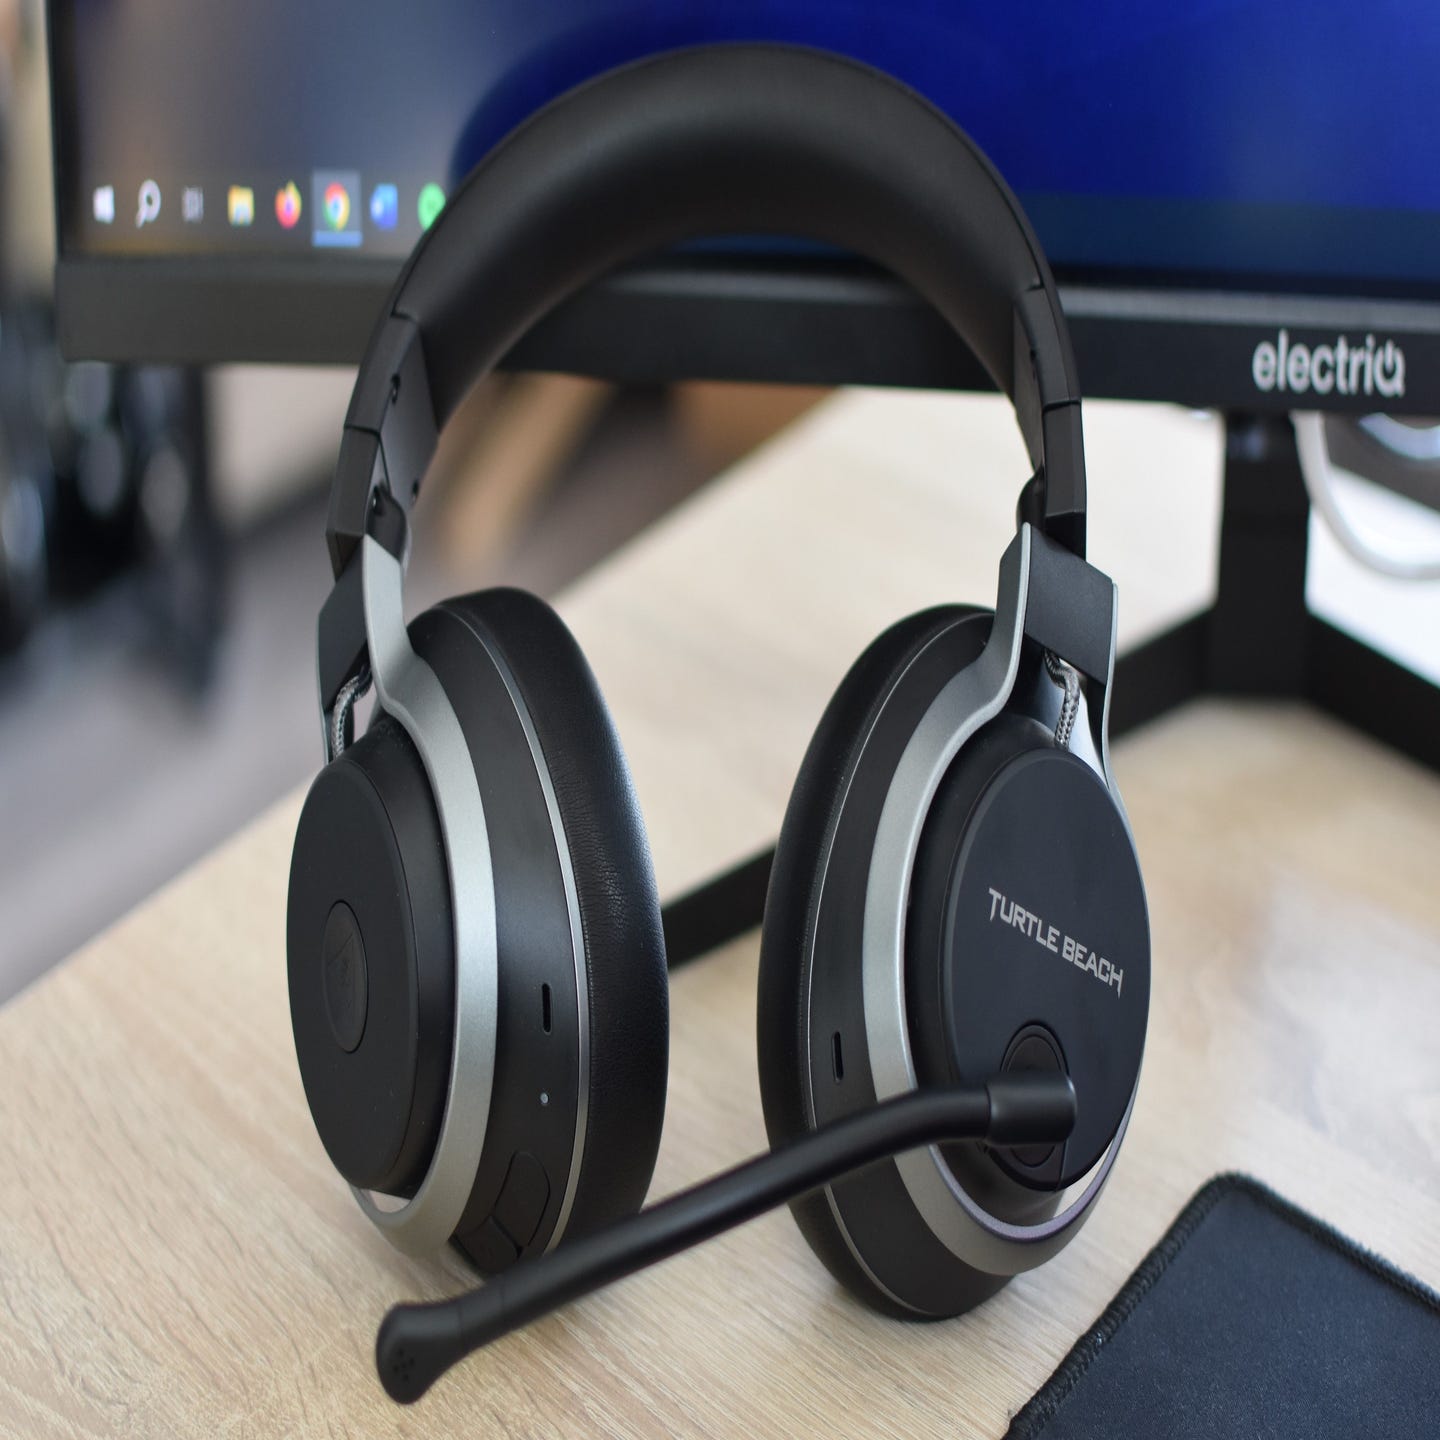 Professional all-rounder headset for hybrid working